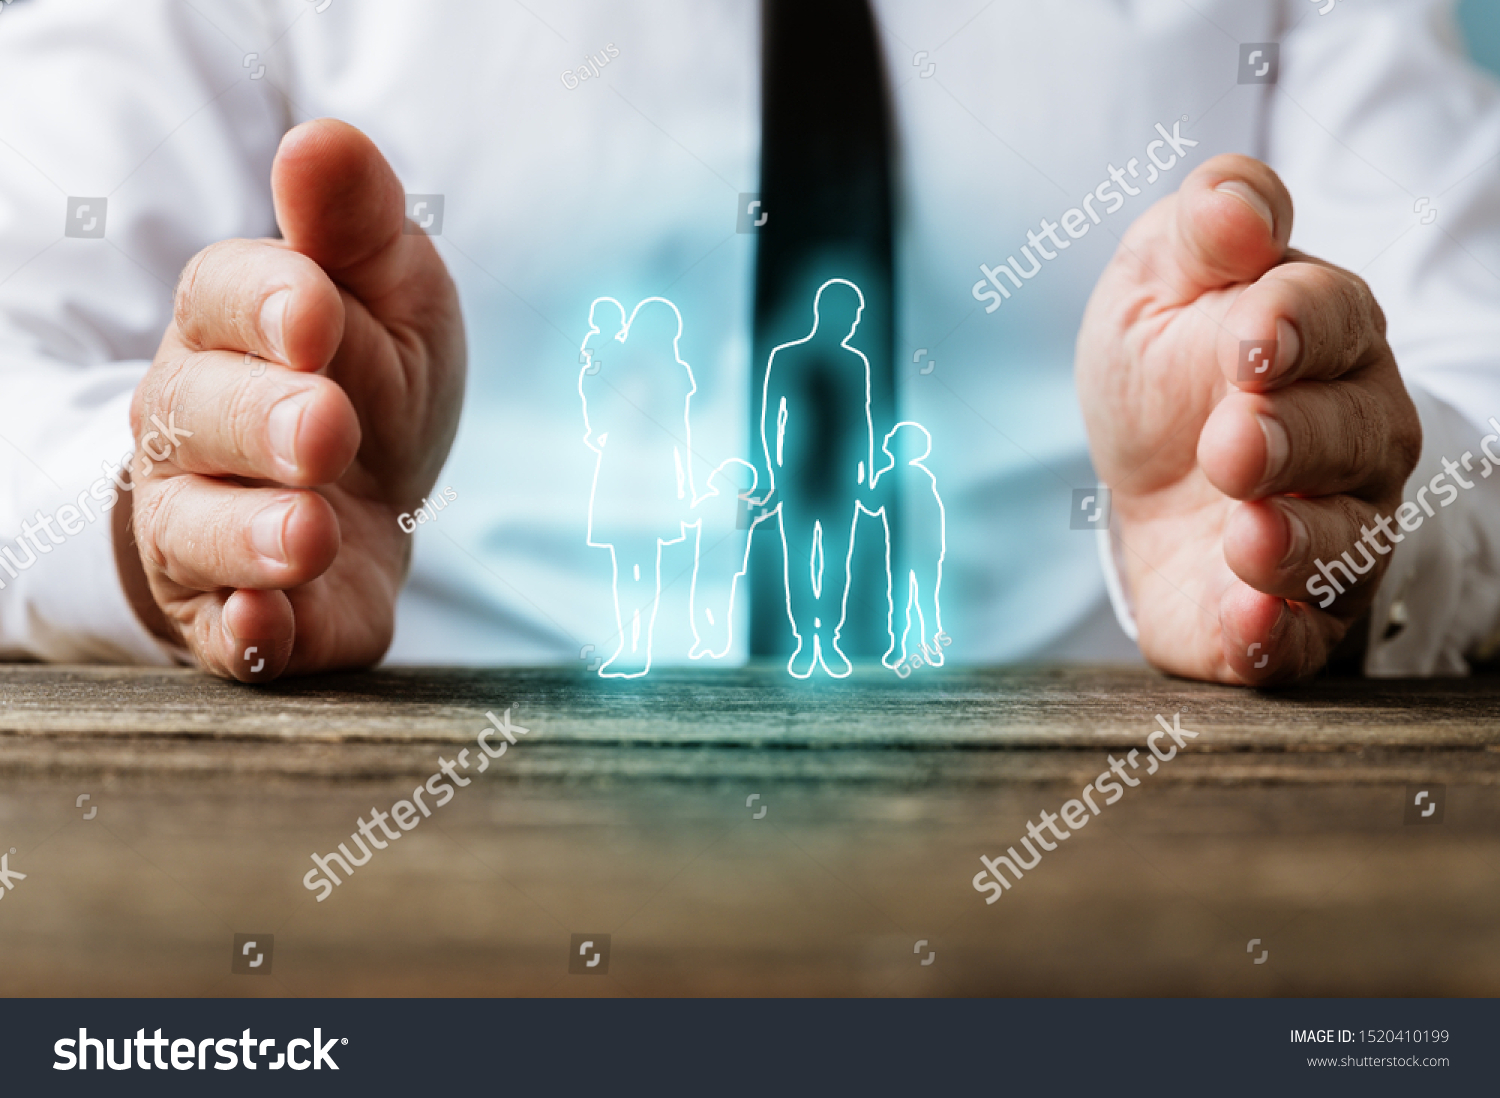 Glowing silhouette of a family on virtual interface with male hands making protective gesture around it in a conceptual image. #1520410199